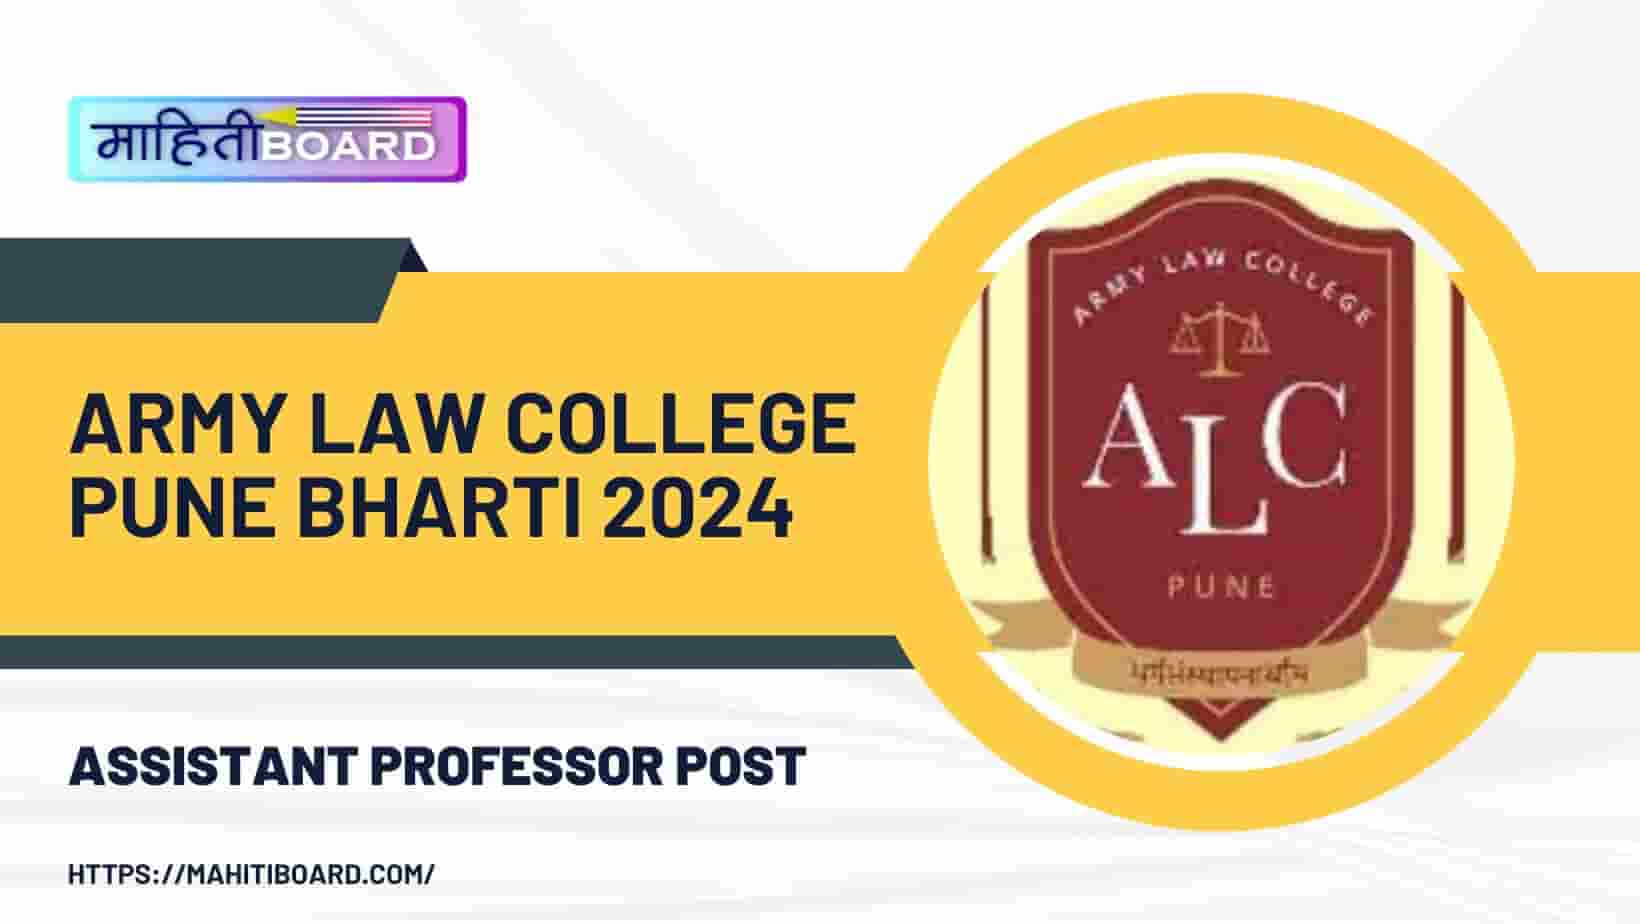 Army Law College Pune Bharti 2024